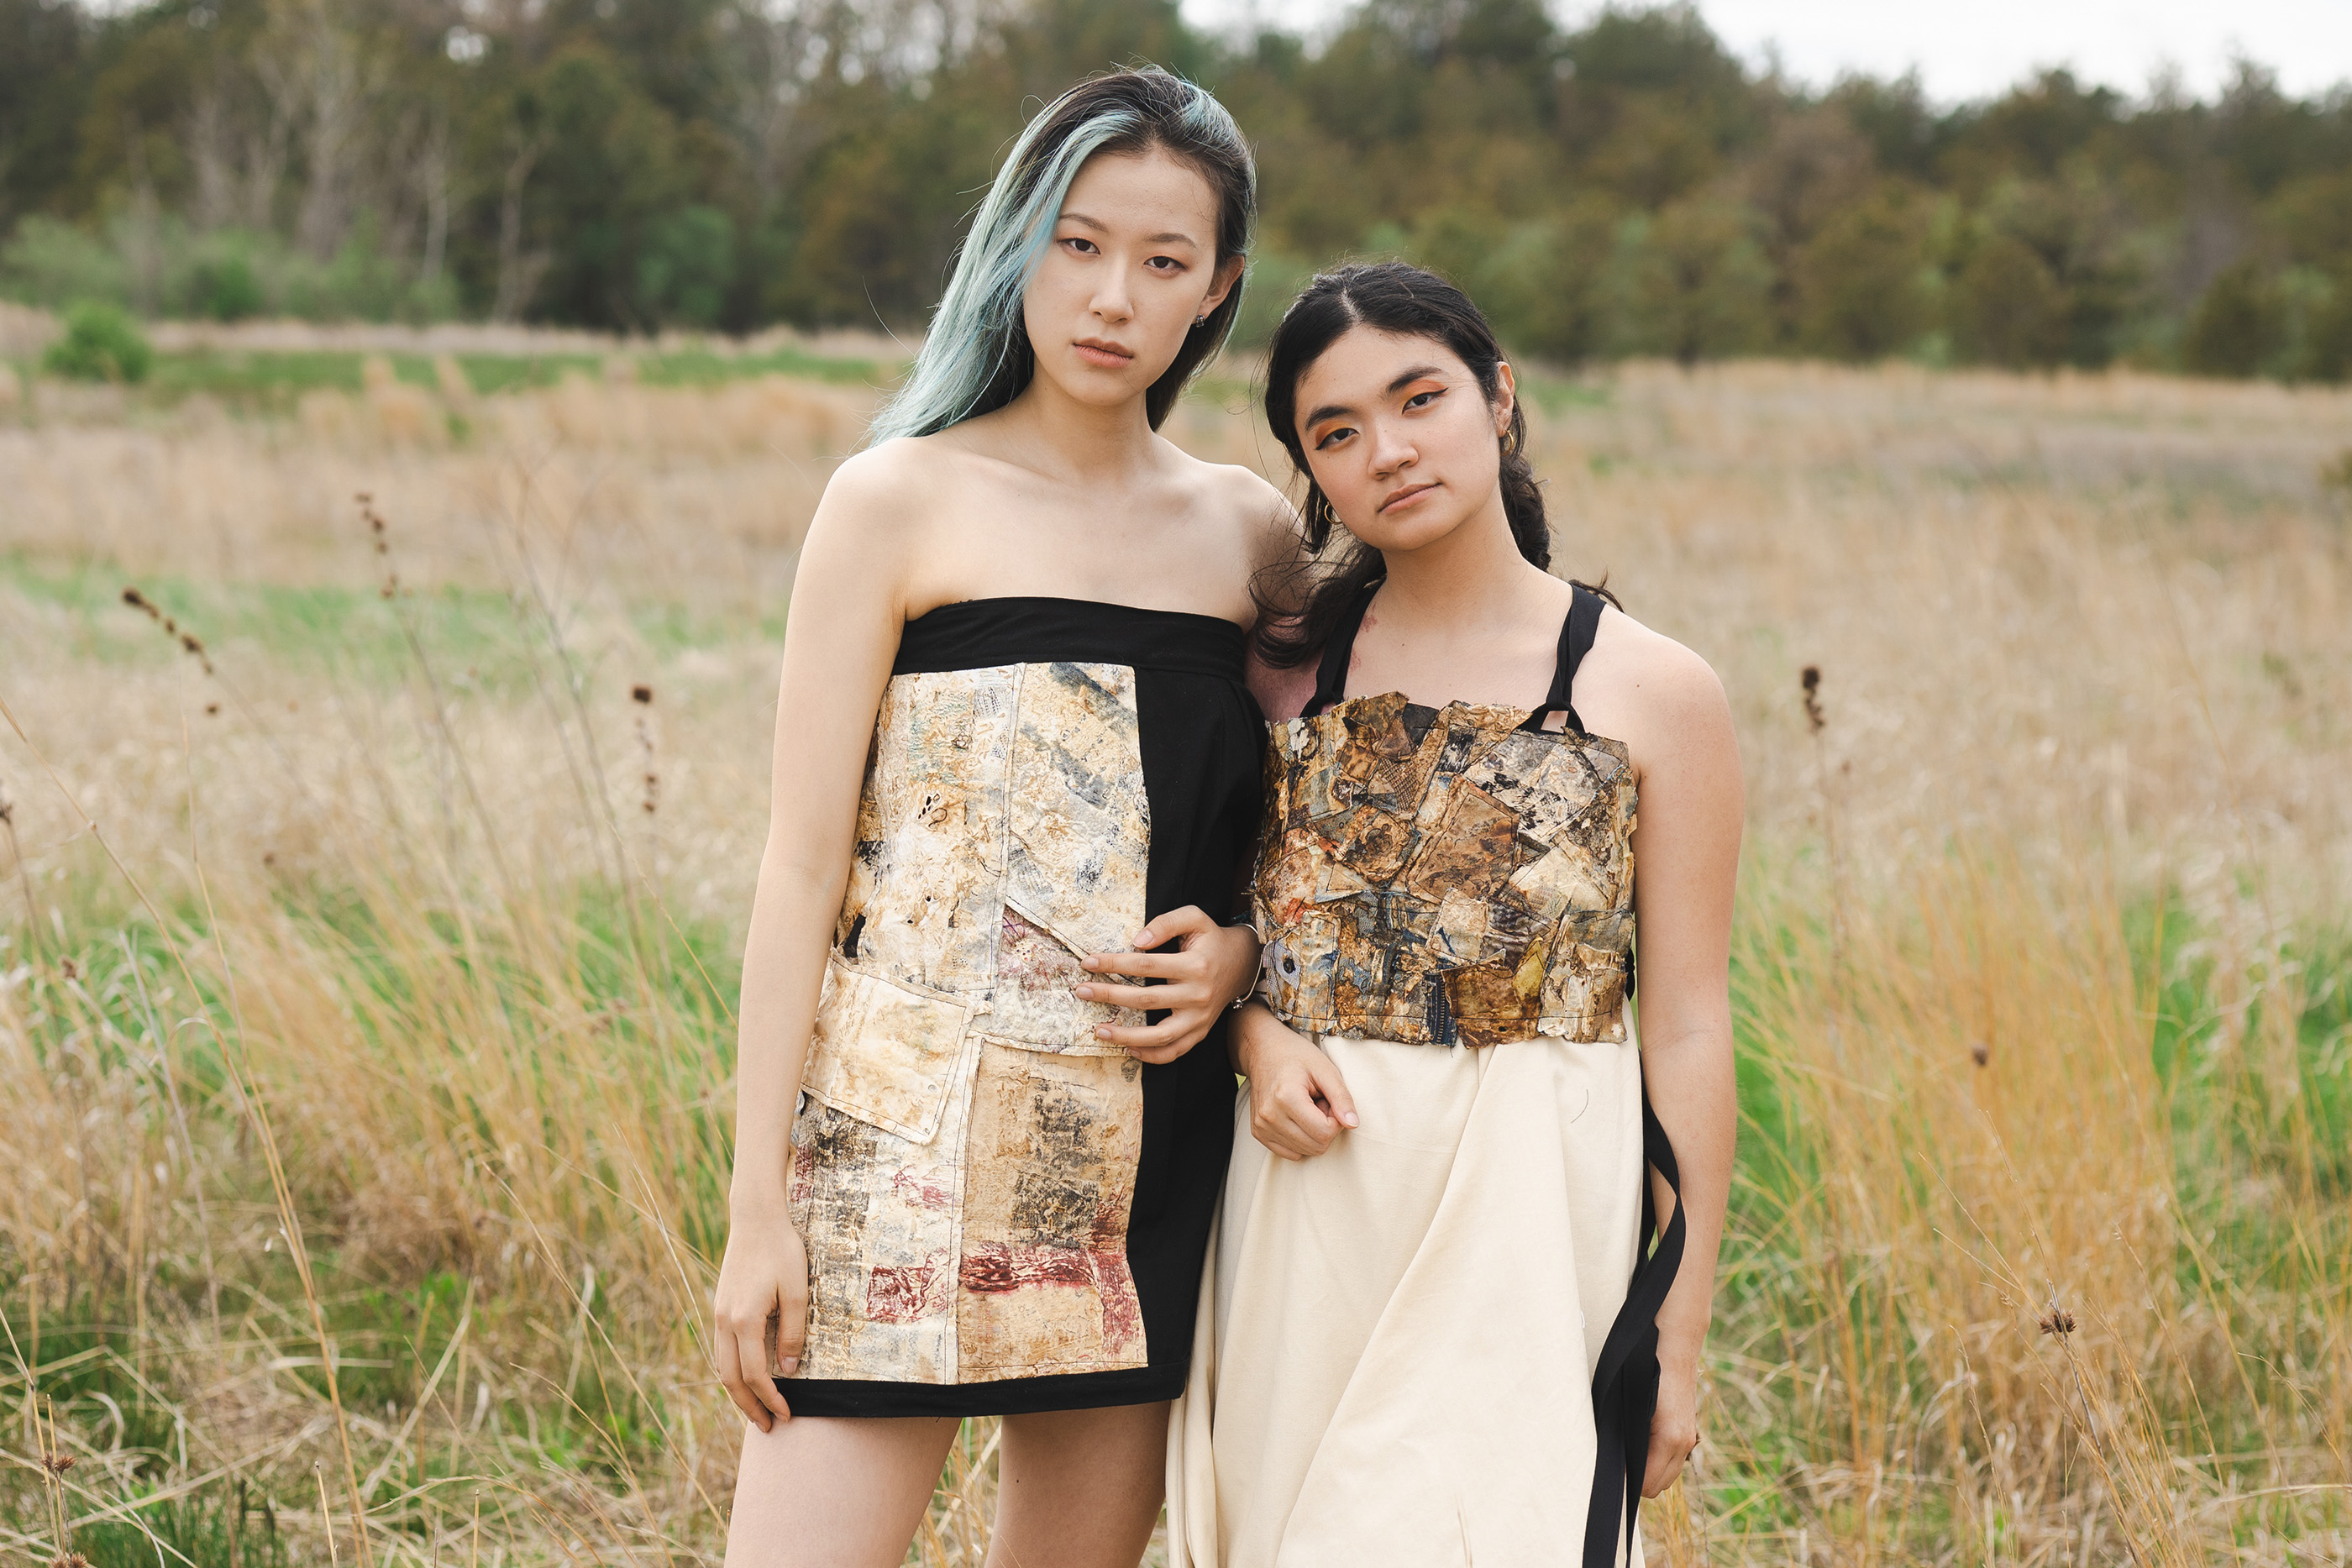 Two models pose in a field